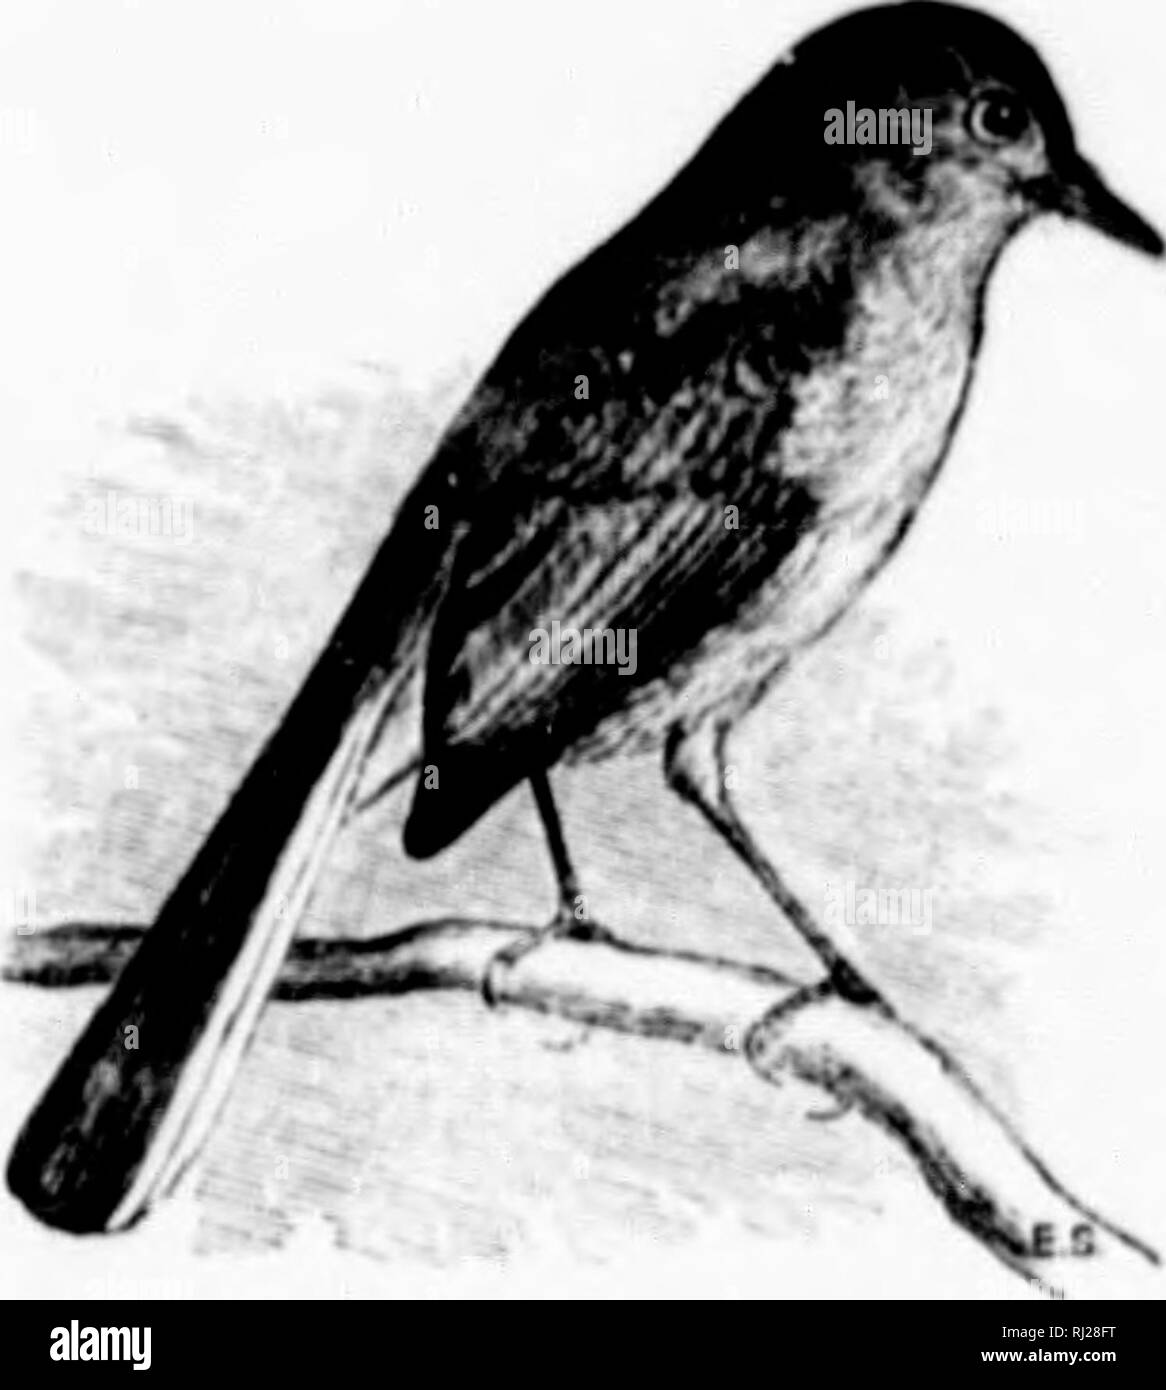 . A popular handbook of the ornithology of eastern North America [microform]. Birds; Ornithology; Oiseaux; Ornithologie. 1. V BLUI:-(;RAV GXA'ICArCHER. h white; wiiii;&gt; du^ky; tail longer than the l)udy, the outer feathers partly white. Fe- male: similar in the male, but lacking the black on head. Length 4,'J to inches AV.f/. A graceful, cup-shaped structure, saddled on limb of a tree 15 or 20 feet from the ground; composed of felted plant fibre ornamented externally with lichens and lined with feathers. £^'s. ^-y, bluish white, speckled with bright brown; 0.55 X 0.45. Hut for the ]ei^th o Stock Photo